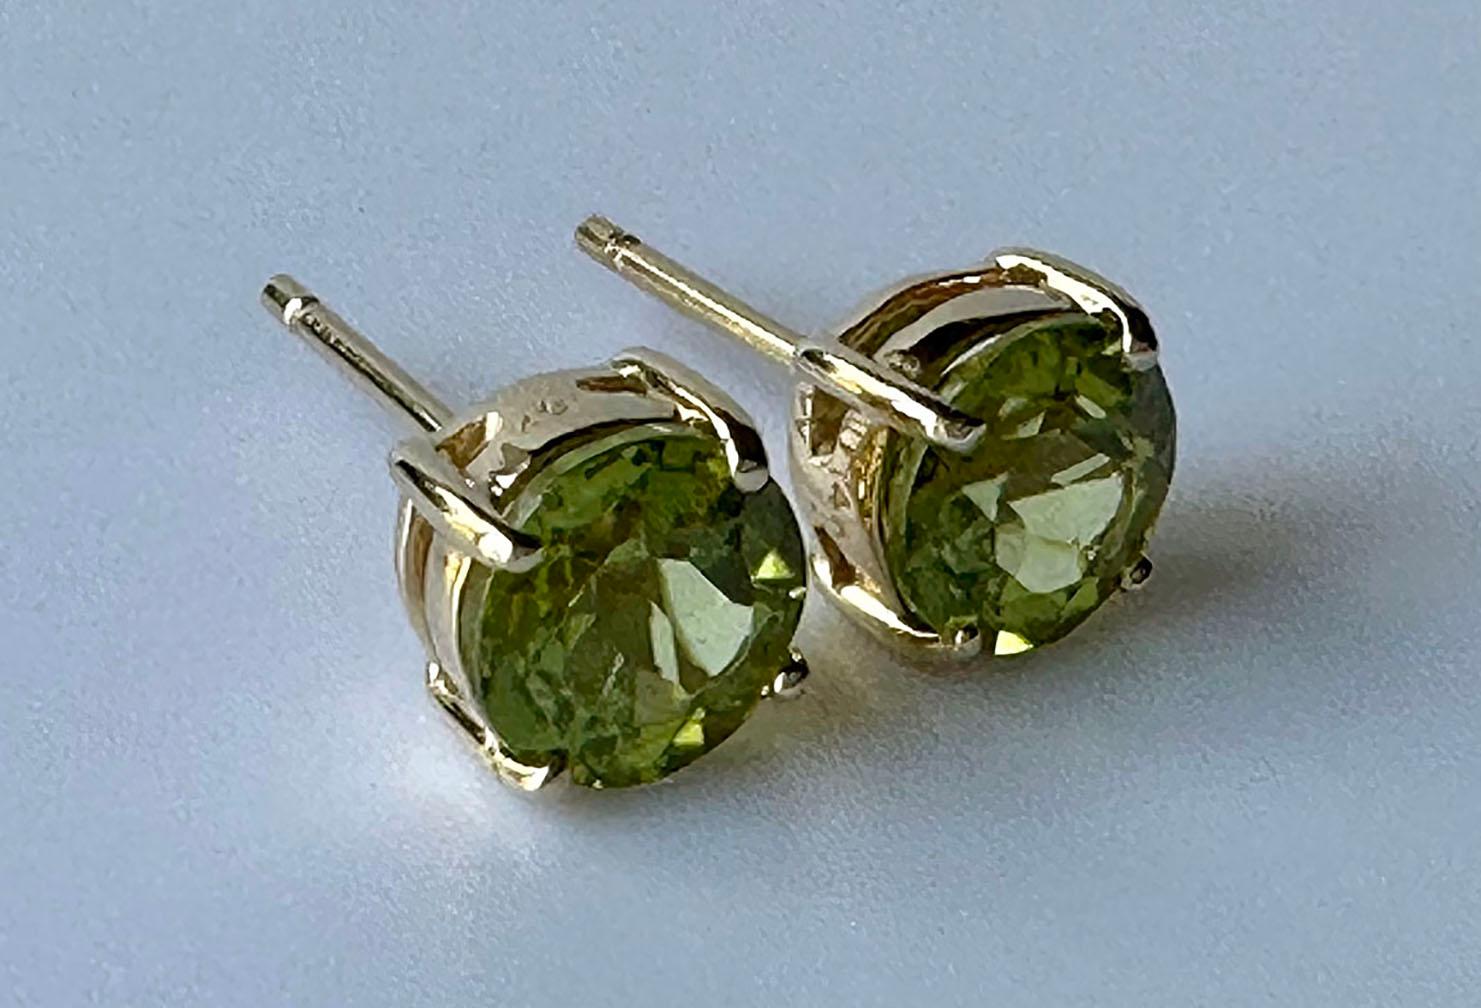 14kt Yellow Gold Stud Earrings set with Peridot/Olivine round brilliants. 
These are simple stylish and match anything. 

Originally from San Diego, California, Kary Adam lived in the “Gem Capital of the World” - Bangkok, Thailand. He frequently